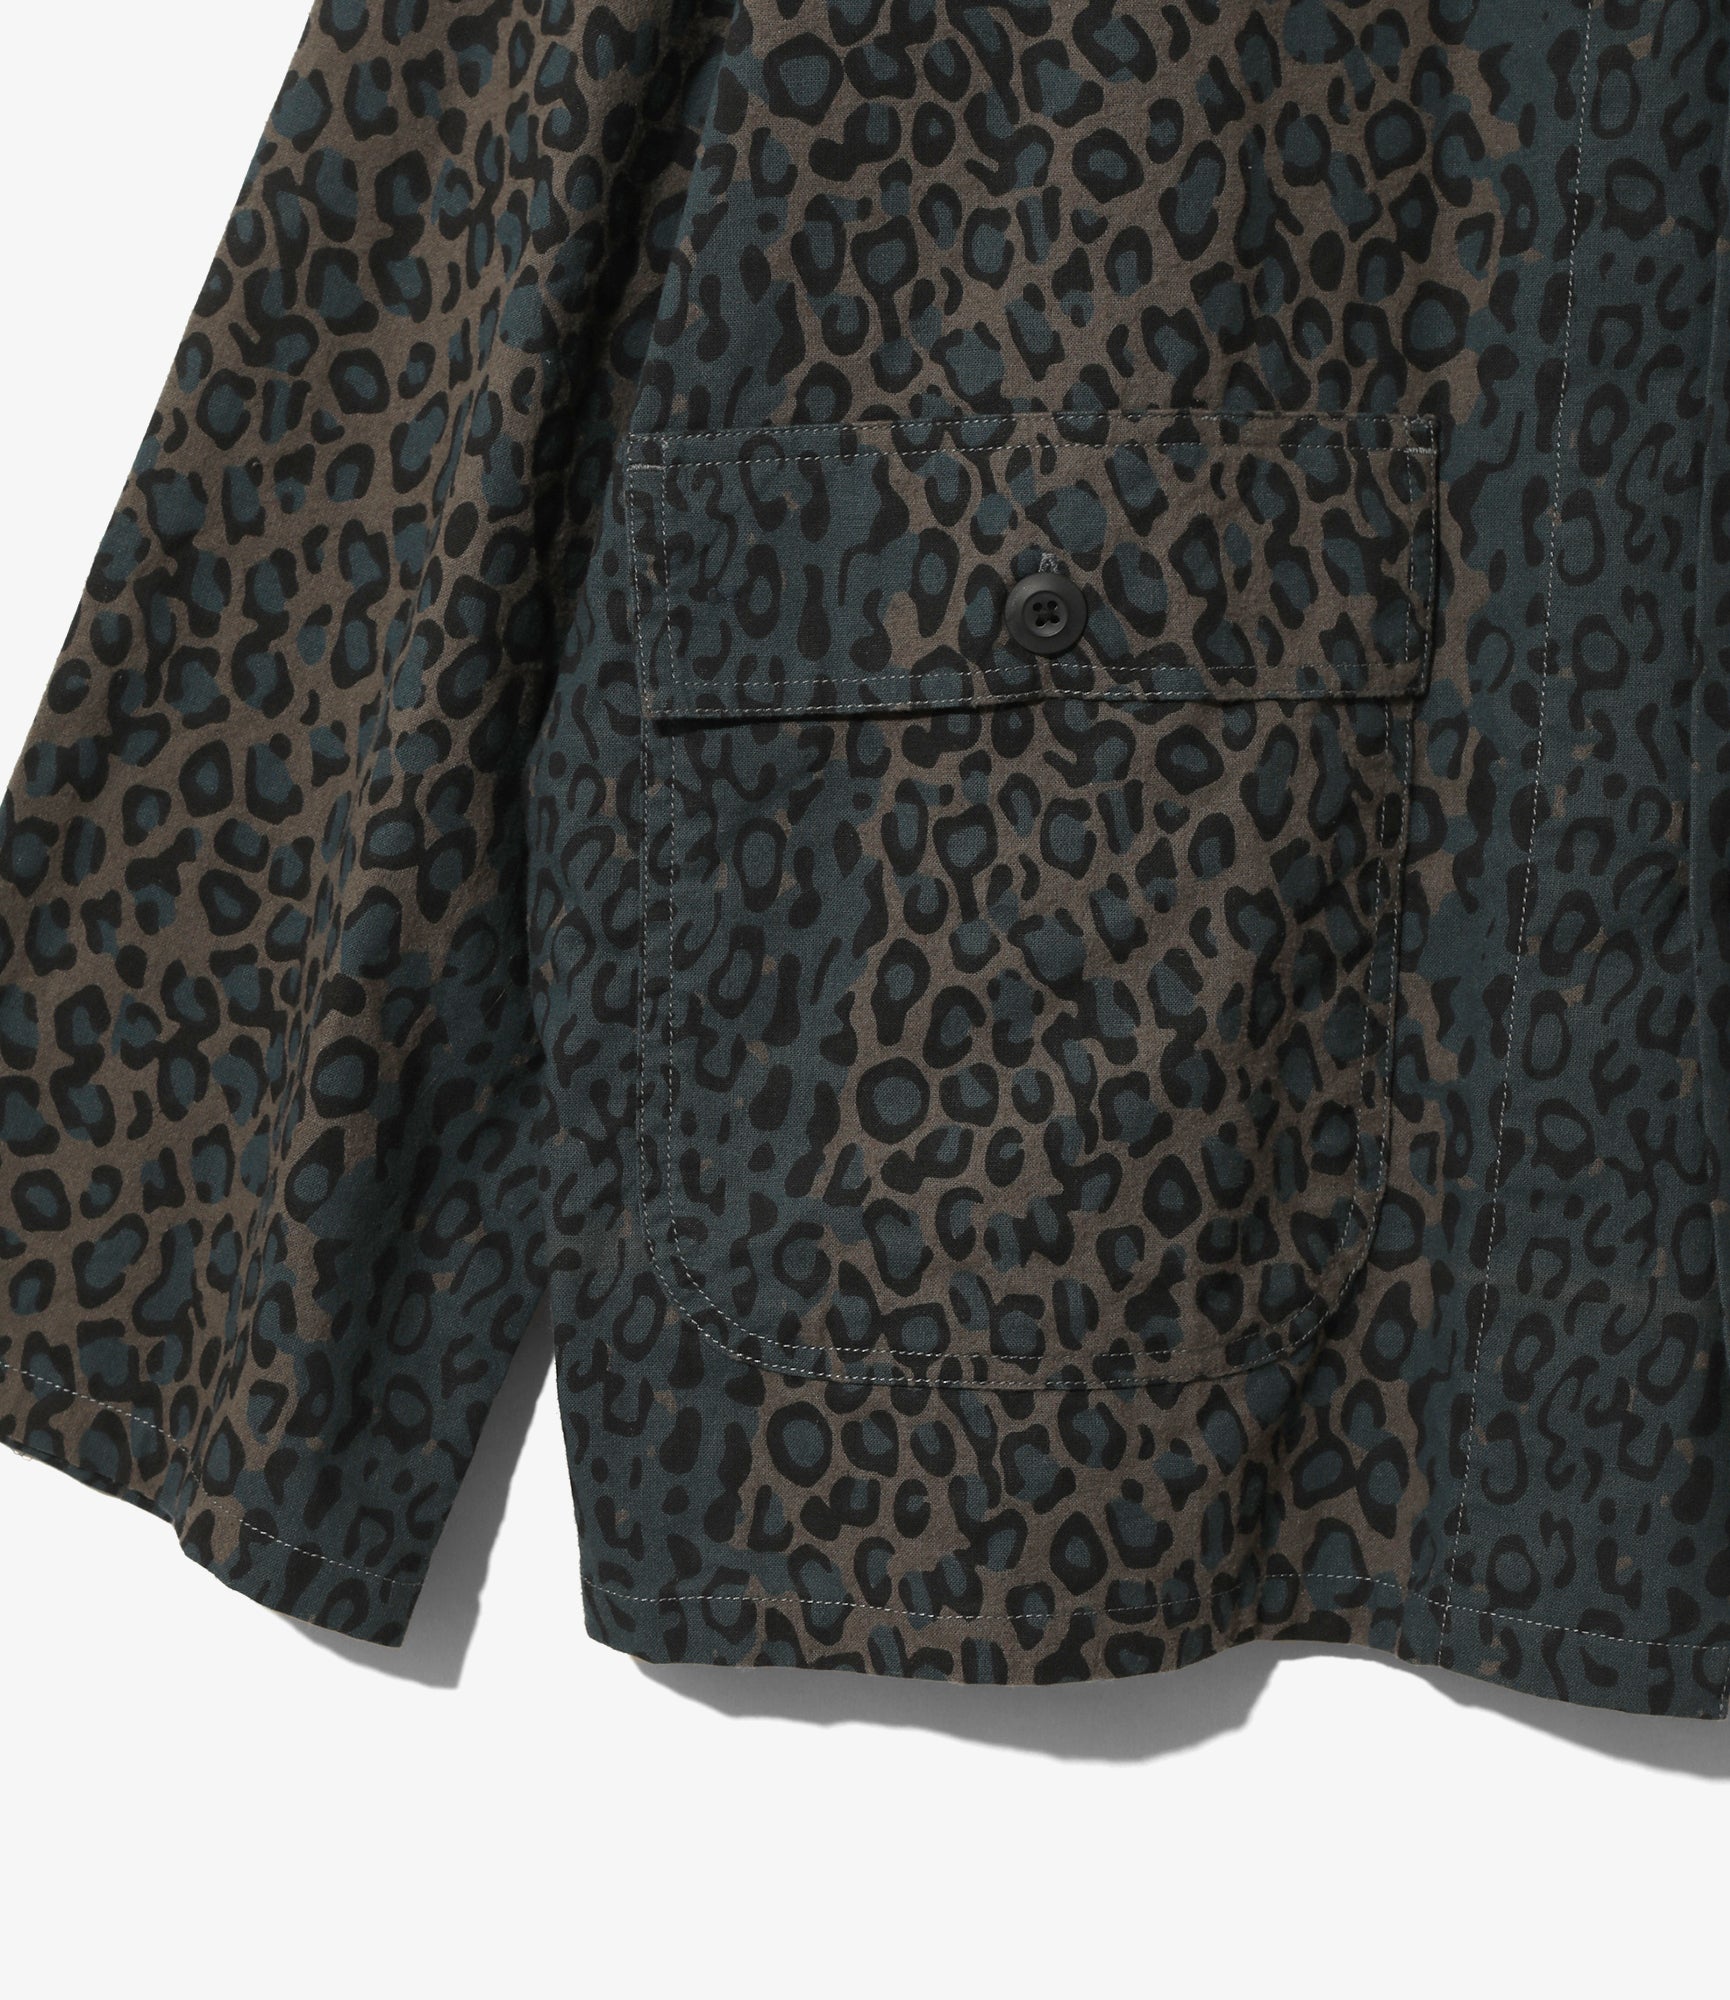 Hunting Shirt - Leopard - Flannel Cloth / Printed